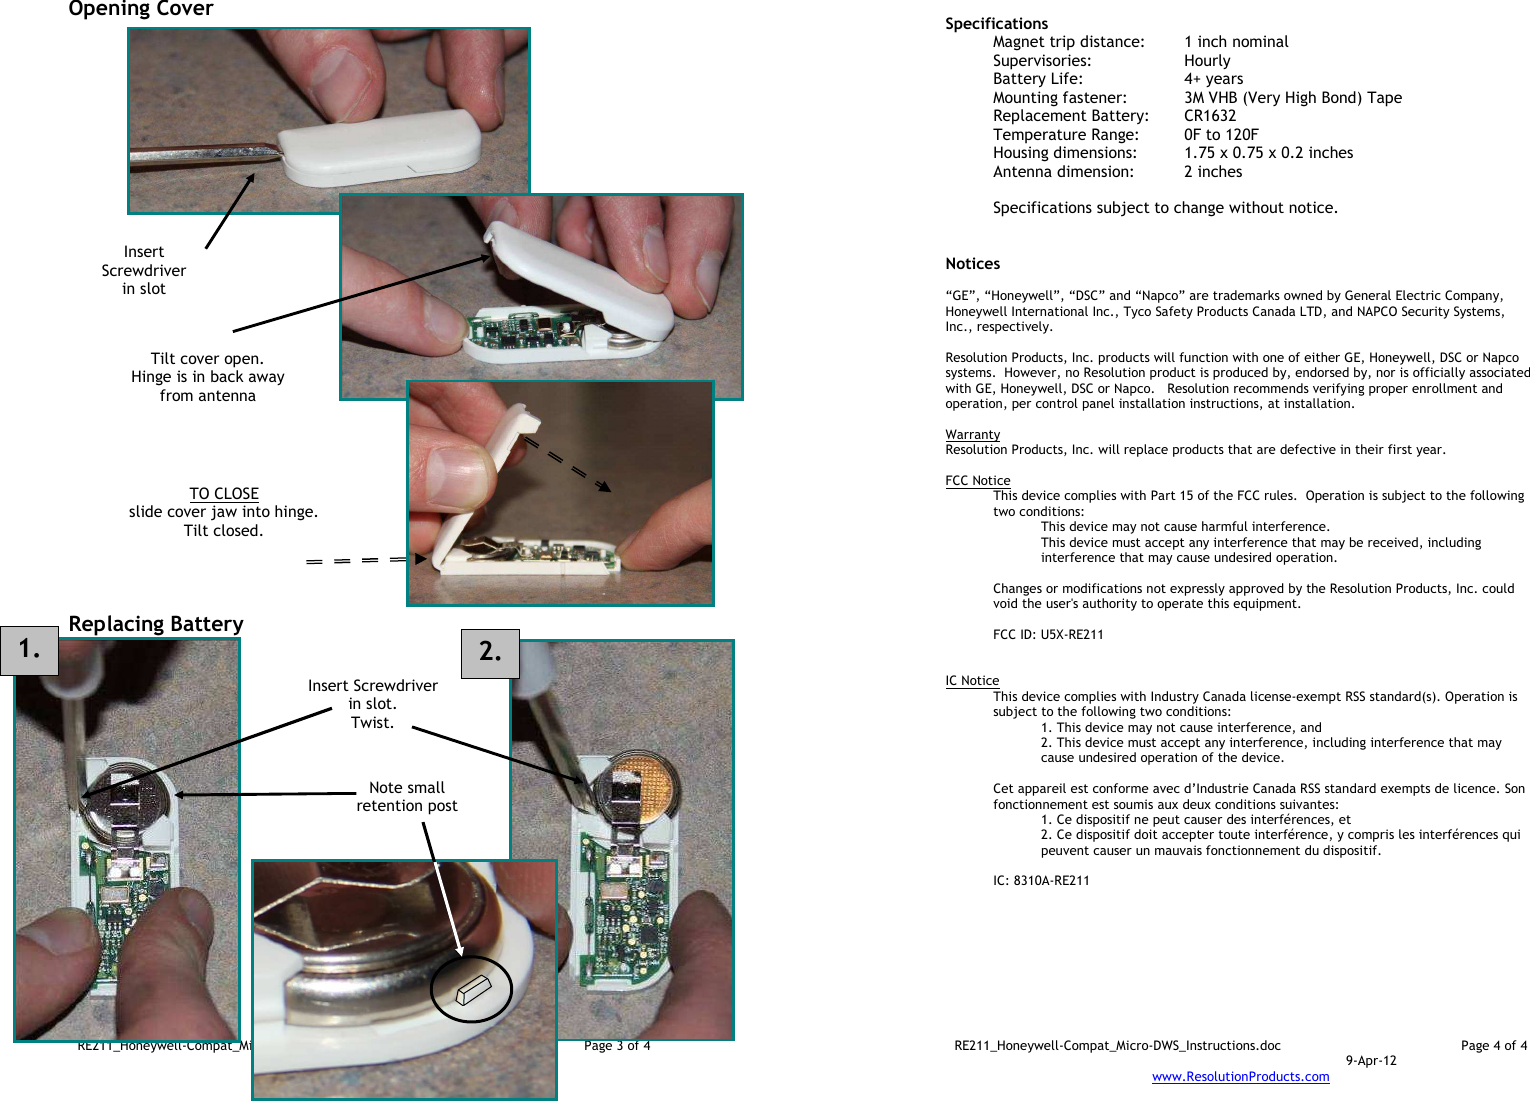 RE211_Honeywell-Compat_Micro-DWS_Instructions.doc  Page 3 of 4  9-Apr-12 www.ResolutionProducts.com  Opening Cover                                 Replacing Battery                     TO CLOSE slide cover jaw into hinge. Tilt closed.  Insert Screwdriver in slot  Tilt cover open. Hinge is in back away from antenna  Insert Screwdriver in slot. Twist.  Note small retention post  1. 2. RE211_Honeywell-Compat_Micro-DWS_Instructions.doc  Page 4 of 4  9-Apr-12 www.ResolutionProducts.com   Specifications   Magnet trip distance:  1 inch nominal Supervisories:  Hourly Battery Life:  4+ years Mounting fastener:  3M VHB (Very High Bond) Tape Replacement Battery:  CR1632 Temperature Range:  0F to 120F Housing dimensions:  1.75 x 0.75 x 0.2 inches Antenna dimension:   2 inches  Specifications subject to change without notice.   Notices  “GE”, “Honeywell”, “DSC” and “Napco” are trademarks owned by General Electric Company, Honeywell International Inc., Tyco Safety Products Canada LTD, and NAPCO Security Systems, Inc., respectively.    Resolution Products, Inc. products will function with one of either GE, Honeywell, DSC or Napco systems.  However, no Resolution product is produced by, endorsed by, nor is officially associated with GE, Honeywell, DSC or Napco.   Resolution recommends verifying proper enrollment and operation, per control panel installation instructions, at installation.  Warranty Resolution Products, Inc. will replace products that are defective in their first year.  FCC Notice This device complies with Part 15 of the FCC rules.  Operation is subject to the following two conditions: This device may not cause harmful interference. This device must accept any interference that may be received, including interference that may cause undesired operation.   Changes or modifications not expressly approved by the Resolution Products, Inc. could void the user&apos;s authority to operate this equipment.  FCC ID: U5X-RE211   IC Notice This device complies with Industry Canada license-exempt RSS standard(s). Operation is subject to the following two conditions: 1. This device may not cause interference, and  2. This device must accept any interference, including interference that may cause undesired operation of the device.   Cet appareil est conforme avec d’Industrie Canada RSS standard exempts de licence. Son fonctionnement est soumis aux deux conditions suivantes: 1. Ce dispositif ne peut causer des interférences, et 2. Ce dispositif doit accepter toute interférence, y compris les interférences qui peuvent causer un mauvais fonctionnement du dispositif.   IC: 8310A-RE211     